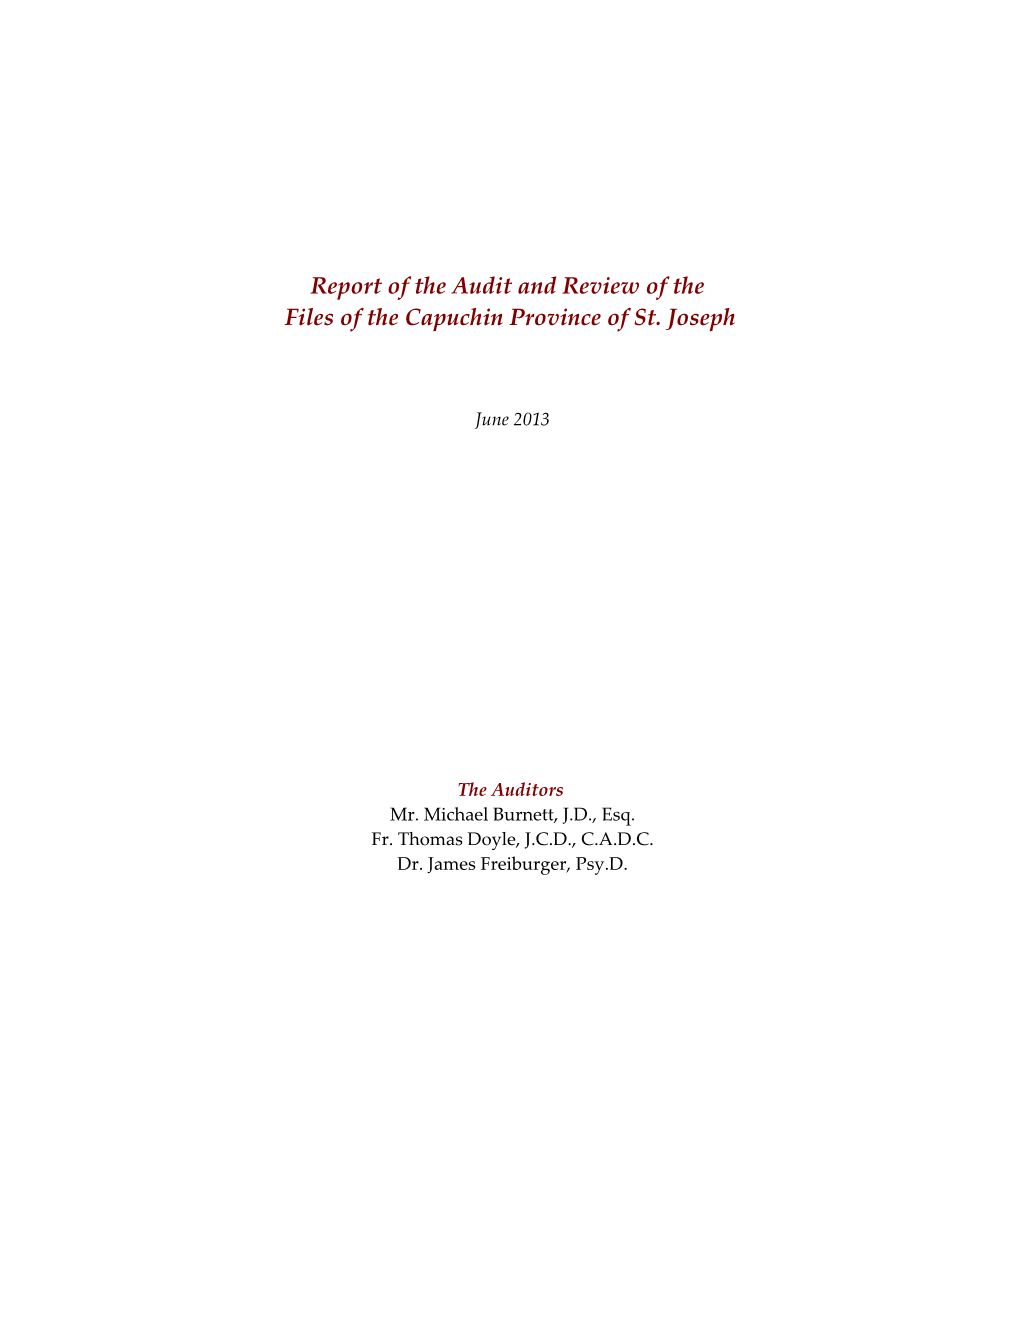 Report of the Audit and Review of the Files of the Capuchin Province of St